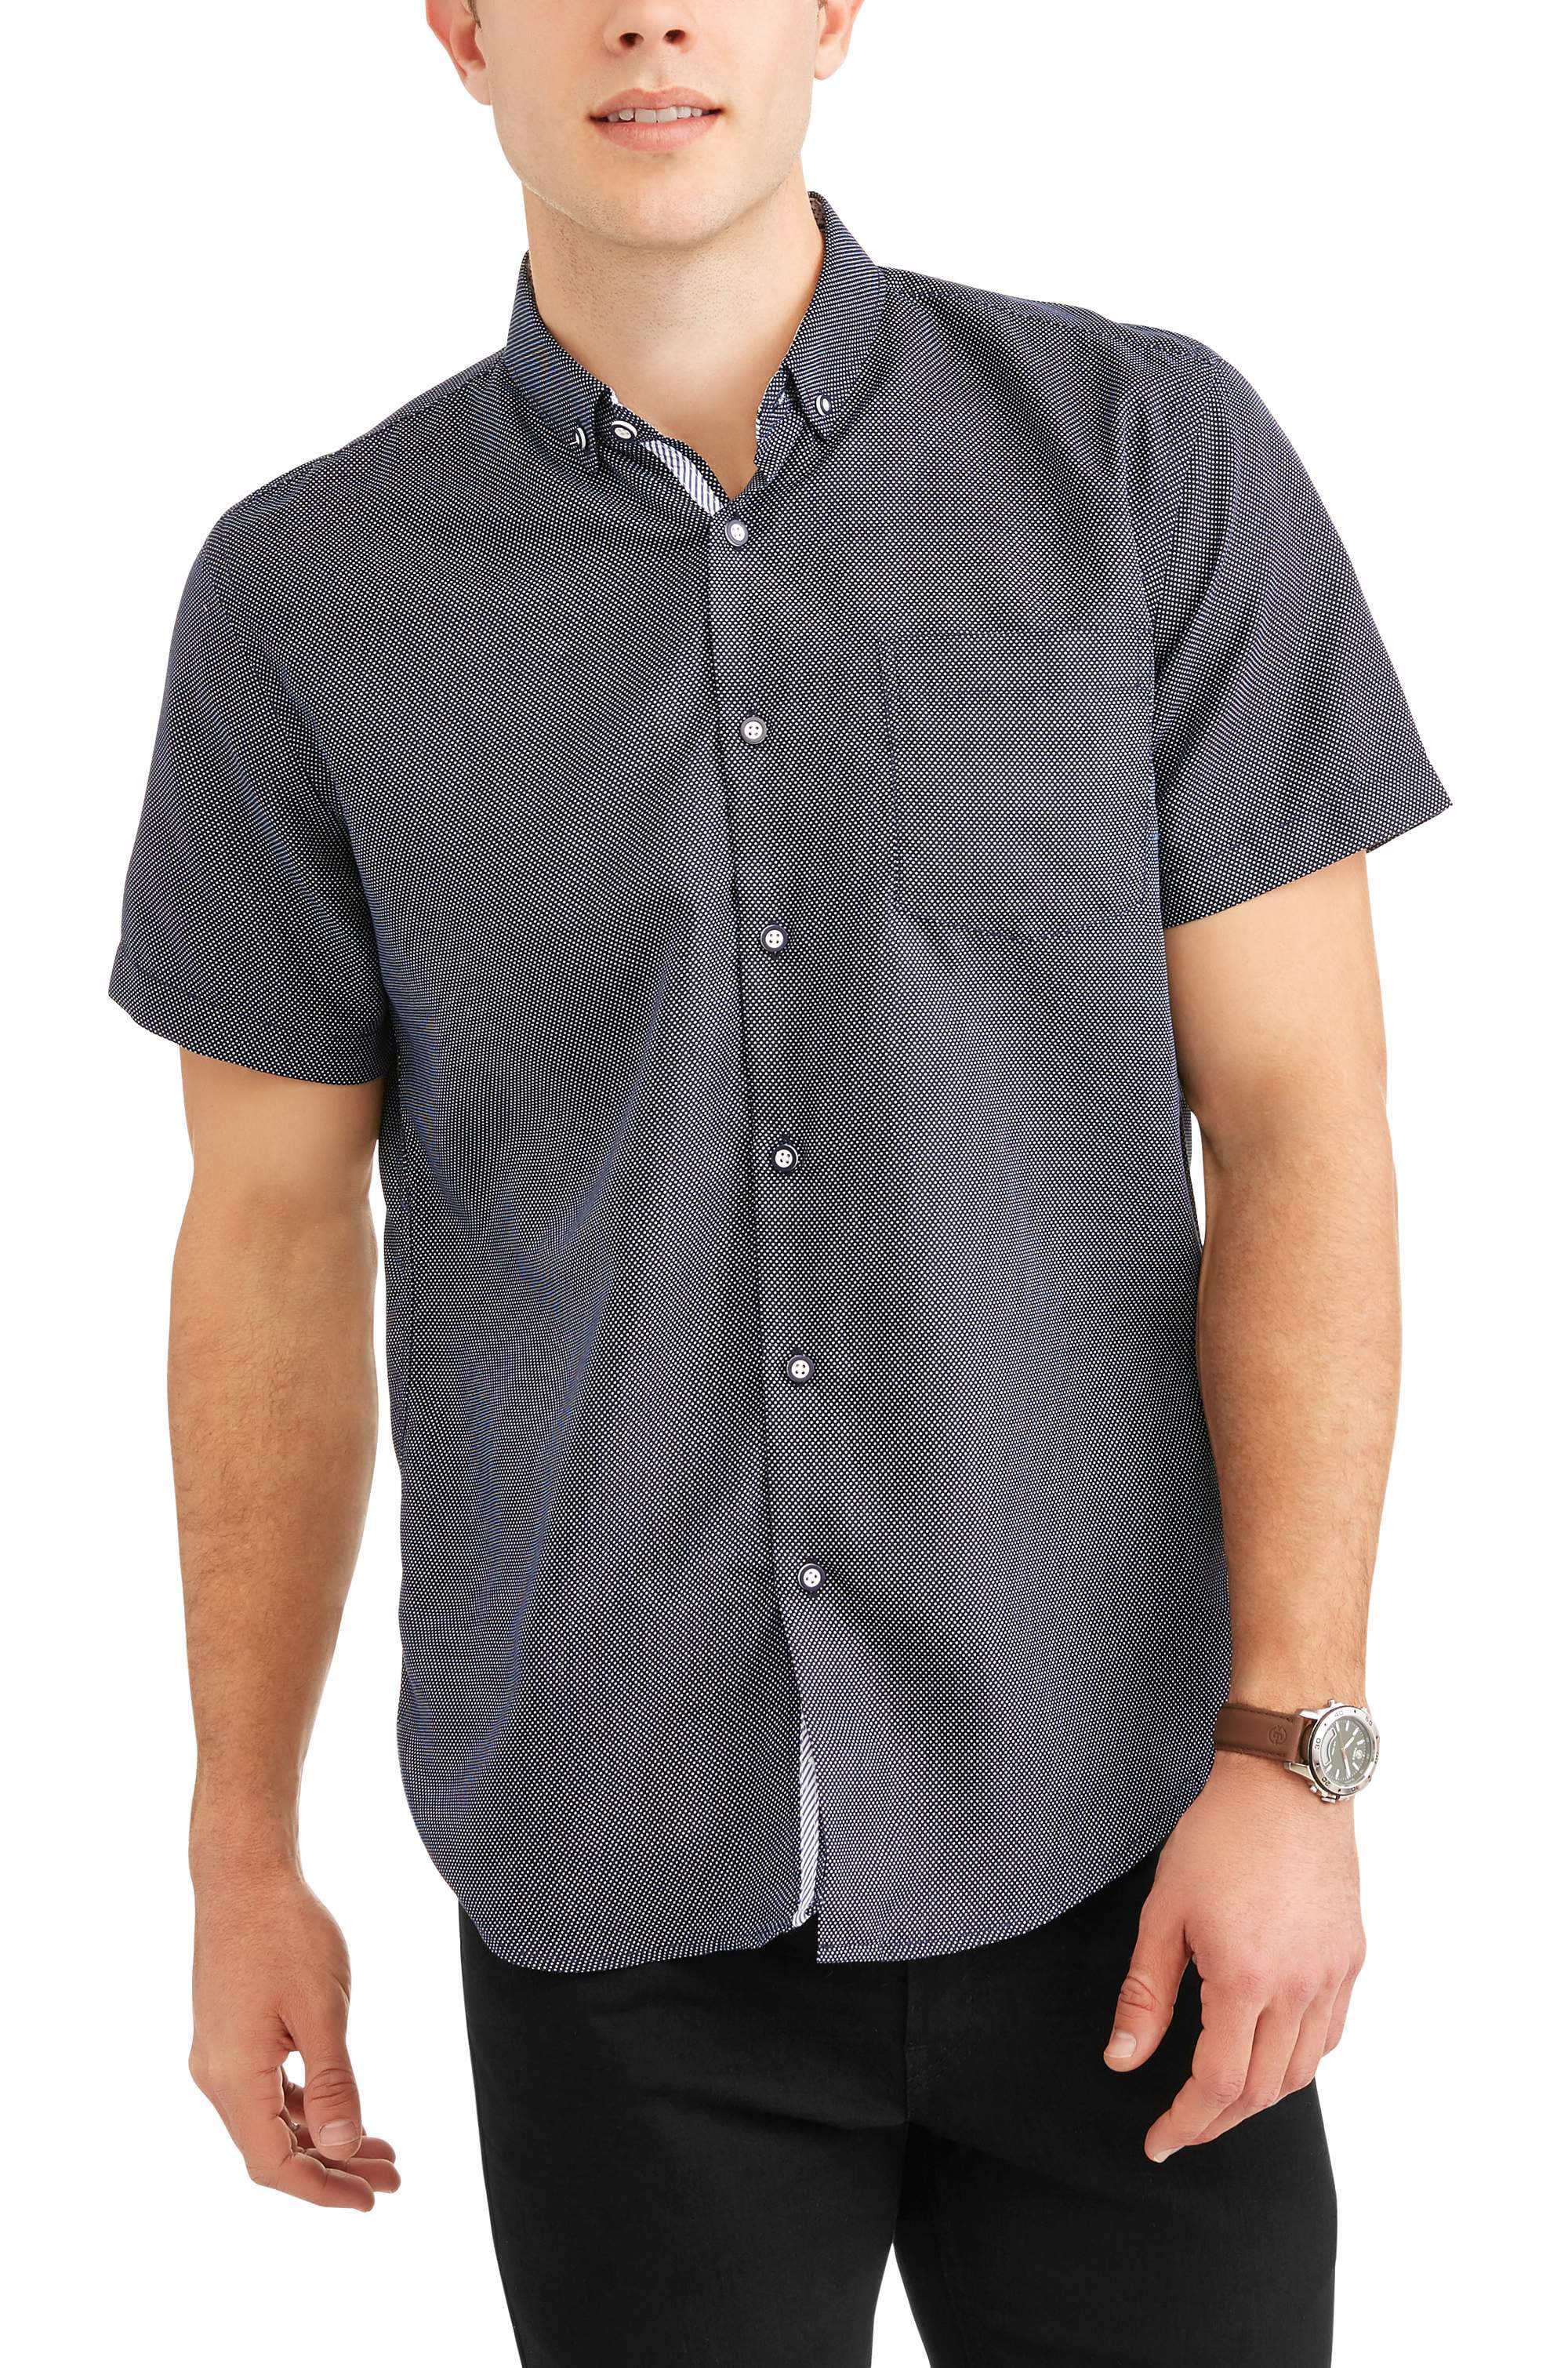 Geometric Mens Button up Shirt in Black Cube All Over Print Short Sleeved  Button Down Shirt Mens Fashion 